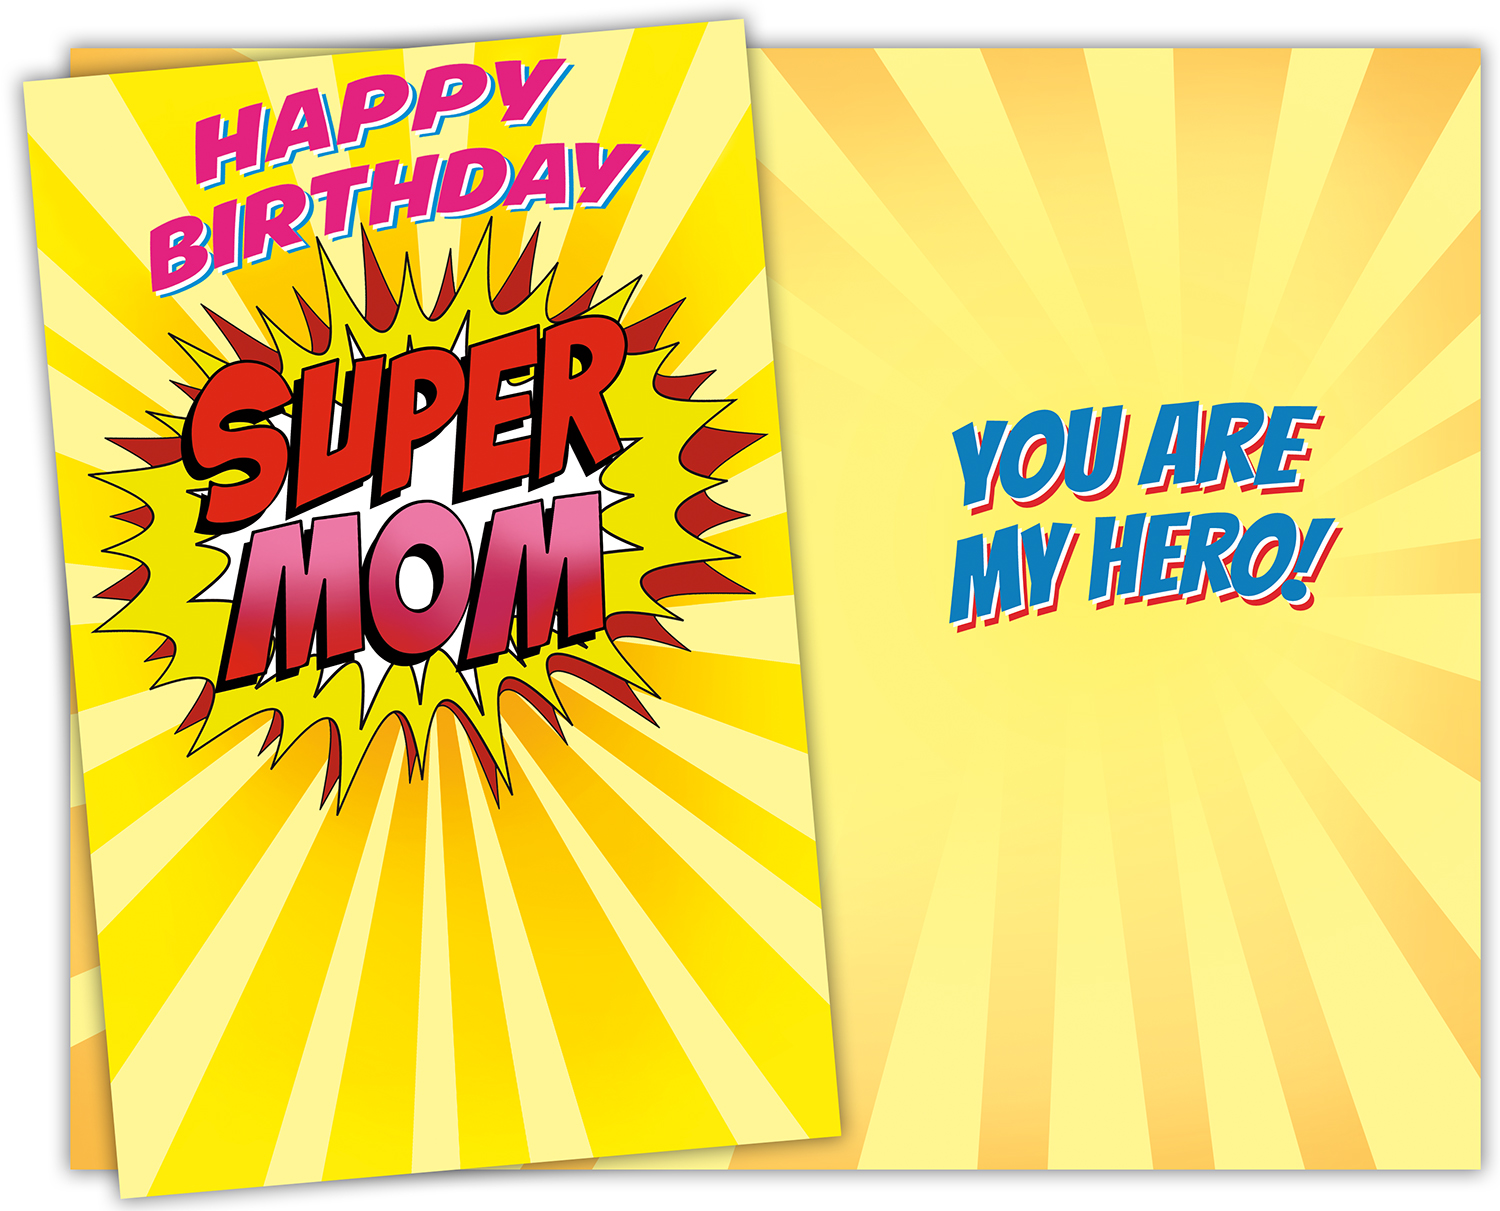 95137 six birthday mom cards with six envelopes, $1.80 for six cards -  Stockwell Greetings